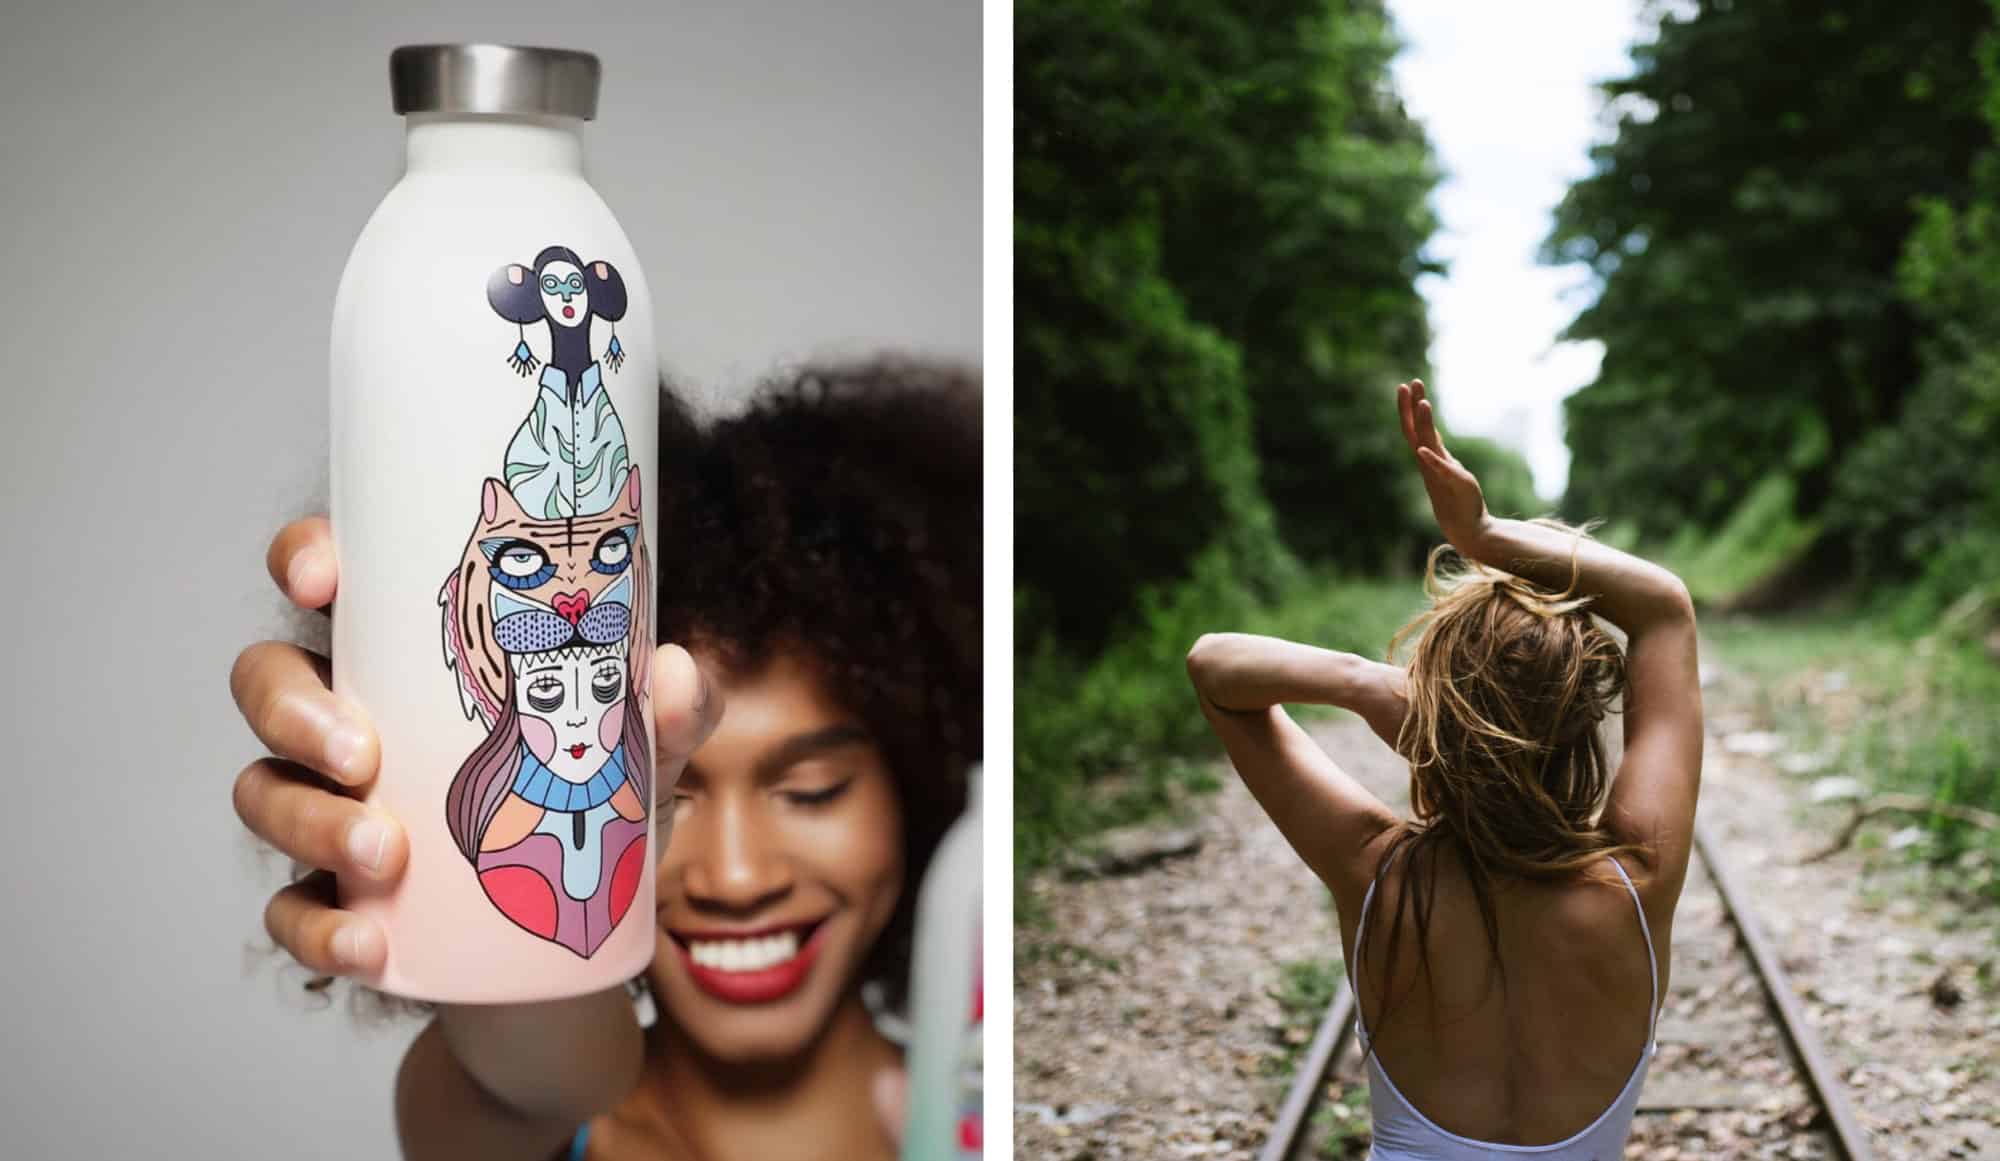 A custom designed water bottle by 24 Bottles for cutting own on plastic use, held up by influencer Elena Salmistraro (left). A young woman seen from the back feeling the heat of Parisian summer as she walks on the Petite Ceinture railway in Paris (right).